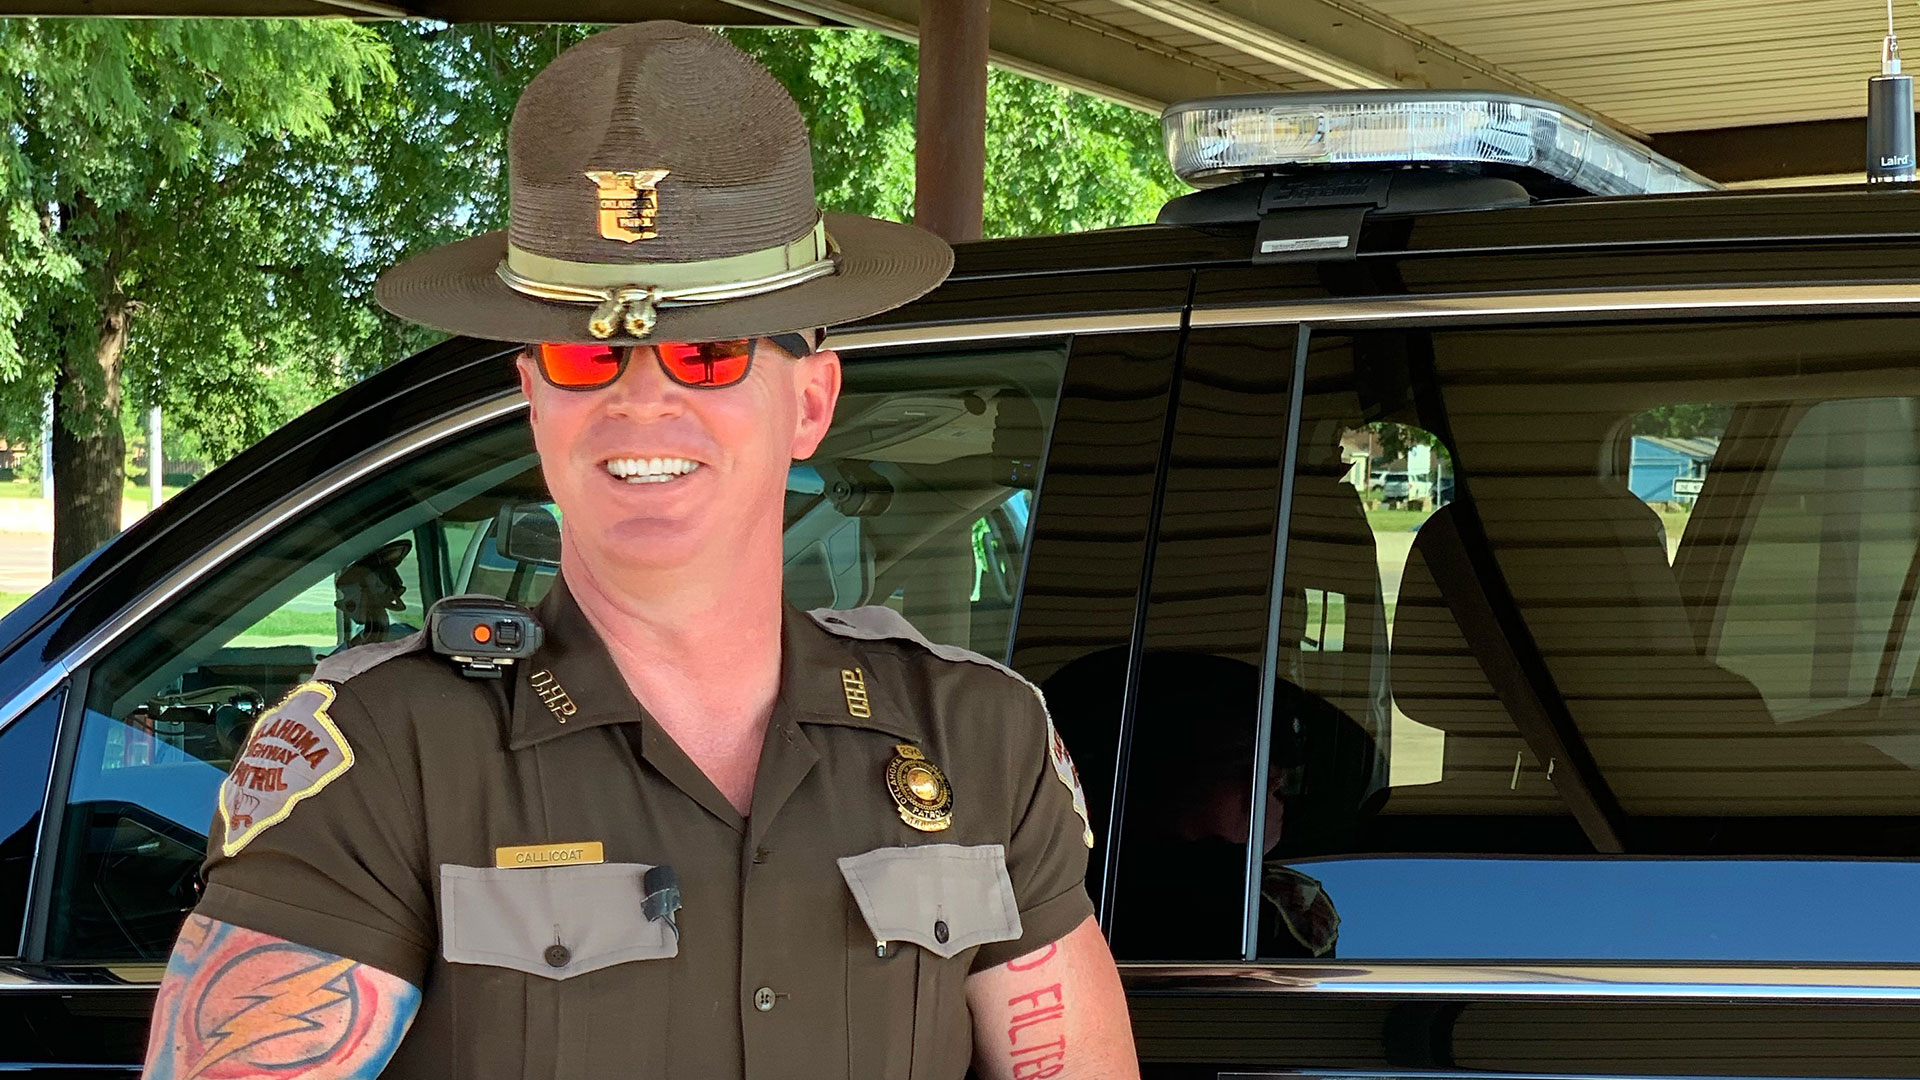 Trooper Russell Callicoat of 'Live PD' on What His Job Means to Him